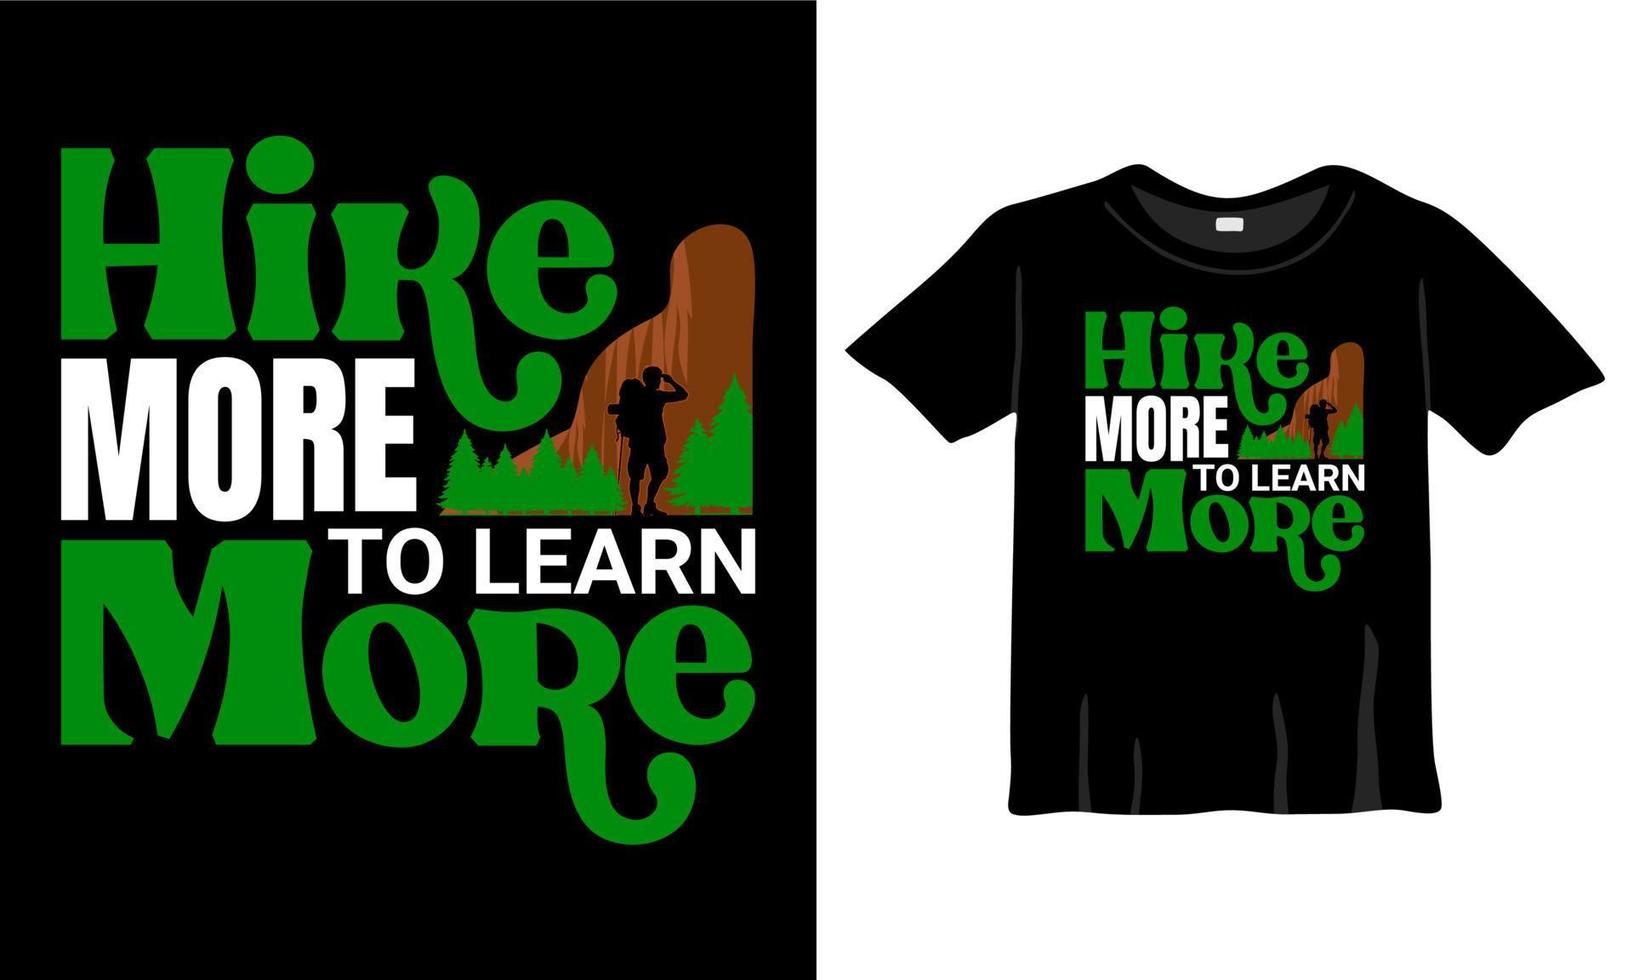 Hike more to learn more t-shirt. Best Hiking t-shirt, mountains t-shirt. Best hiking Shirt vector ever.